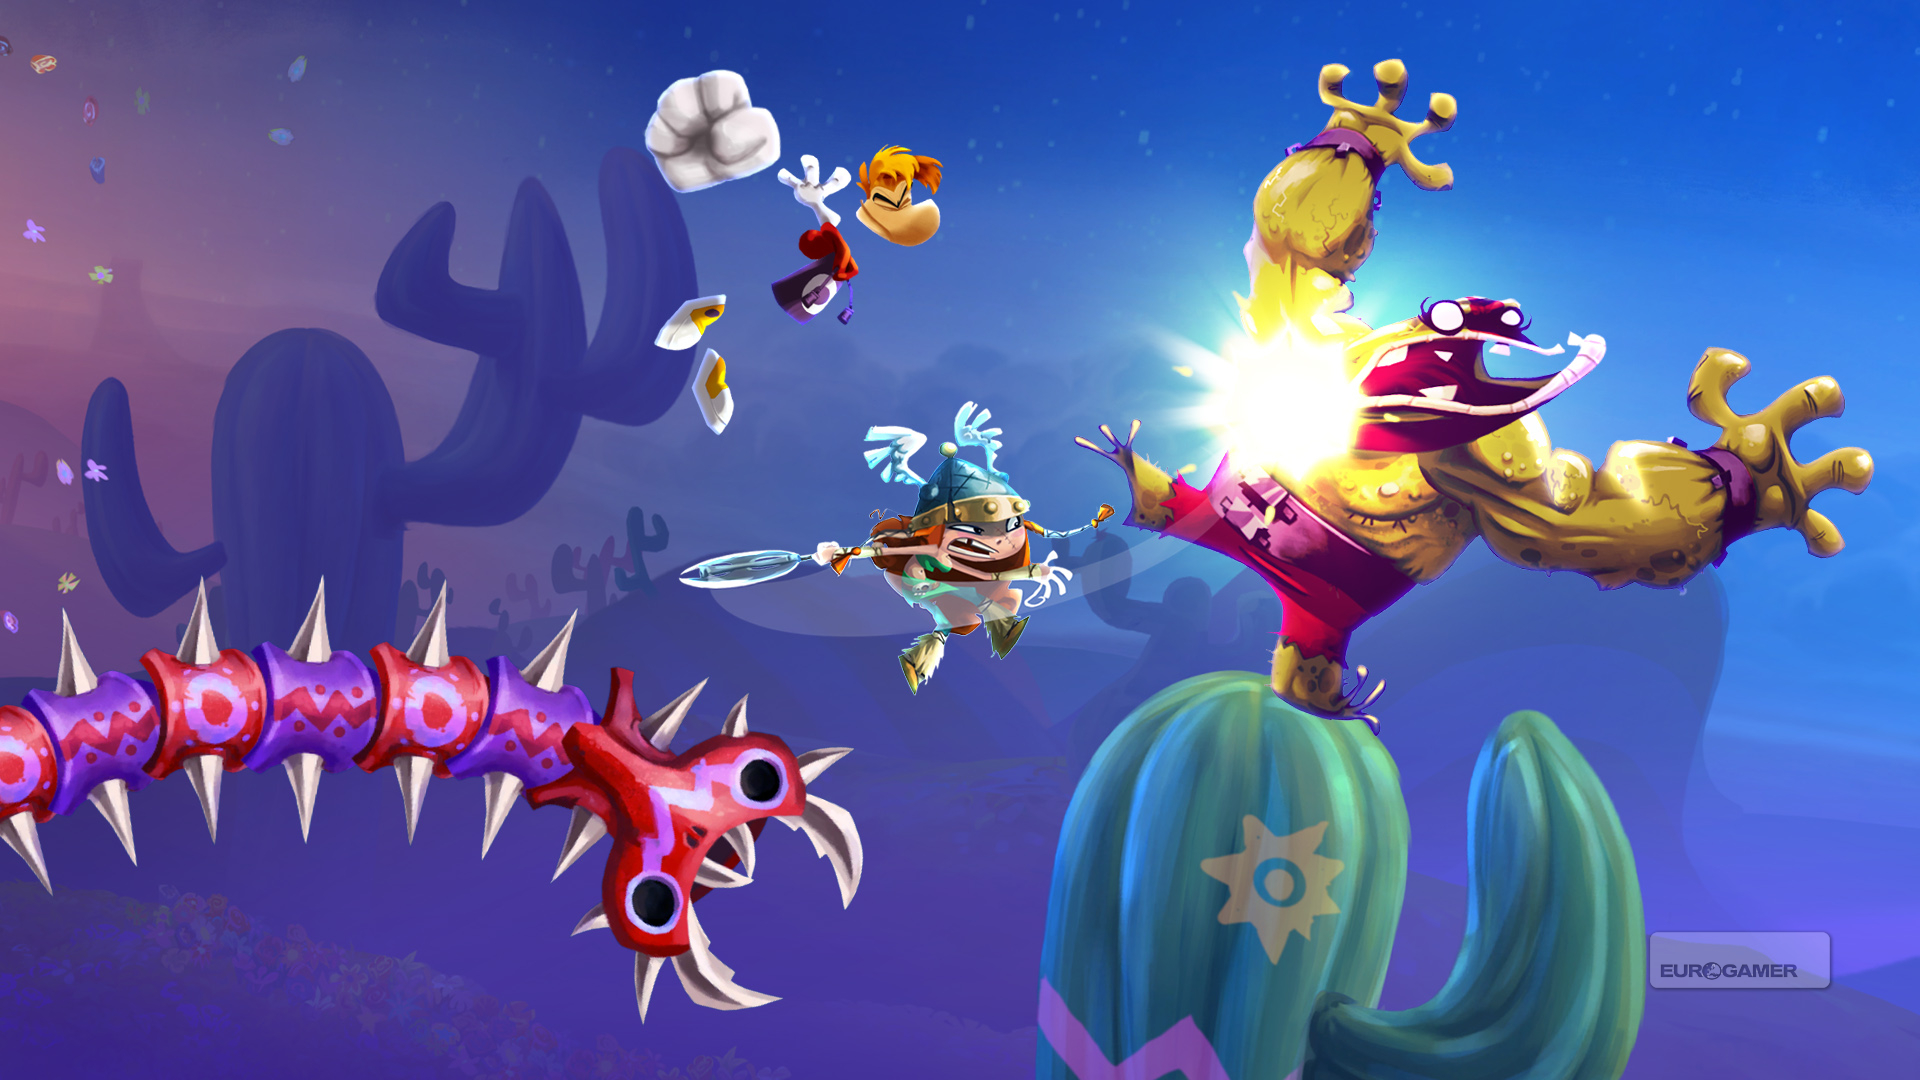 This Rayman Legends Wallpaper Is Available In Sizes